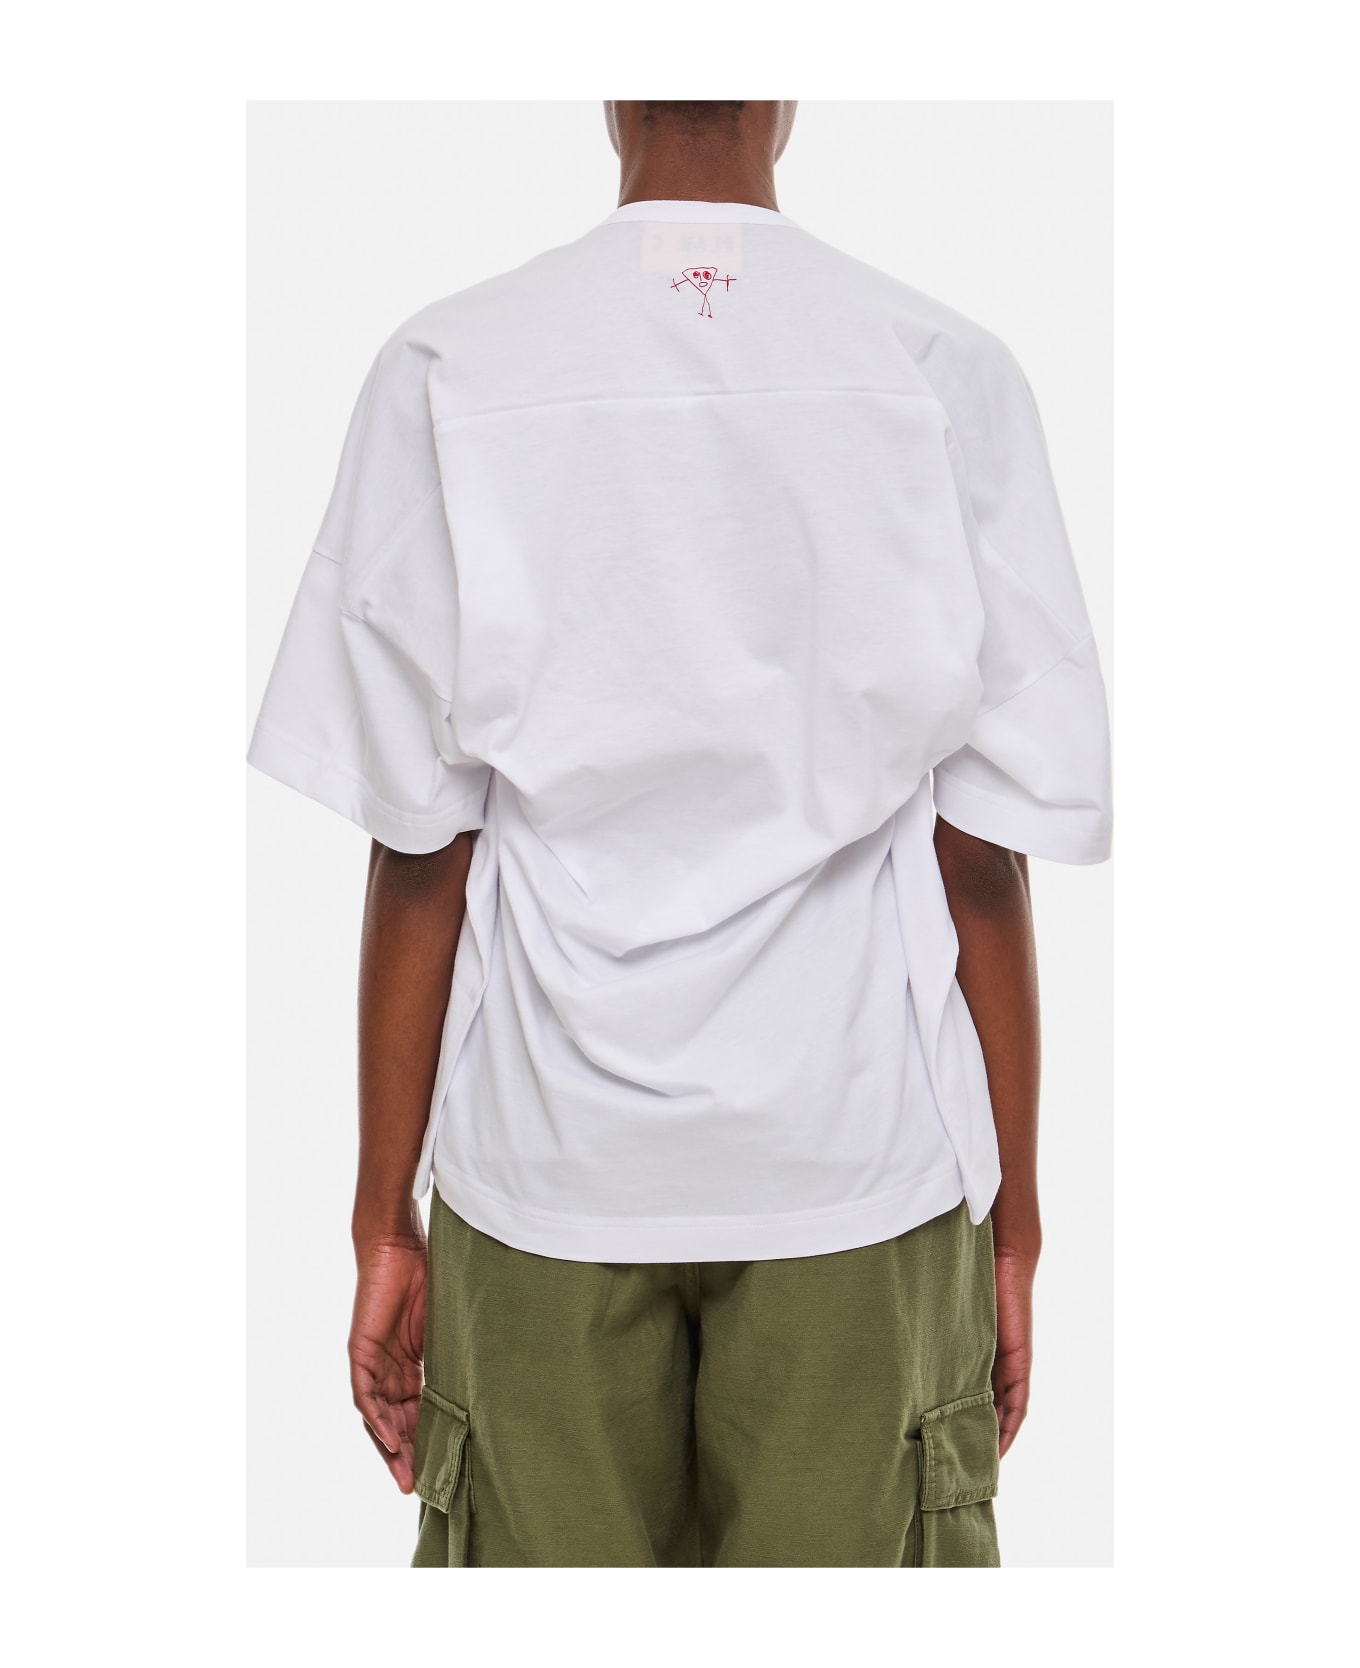 Plan C Relaxed Fit Jersey T-shirt - White